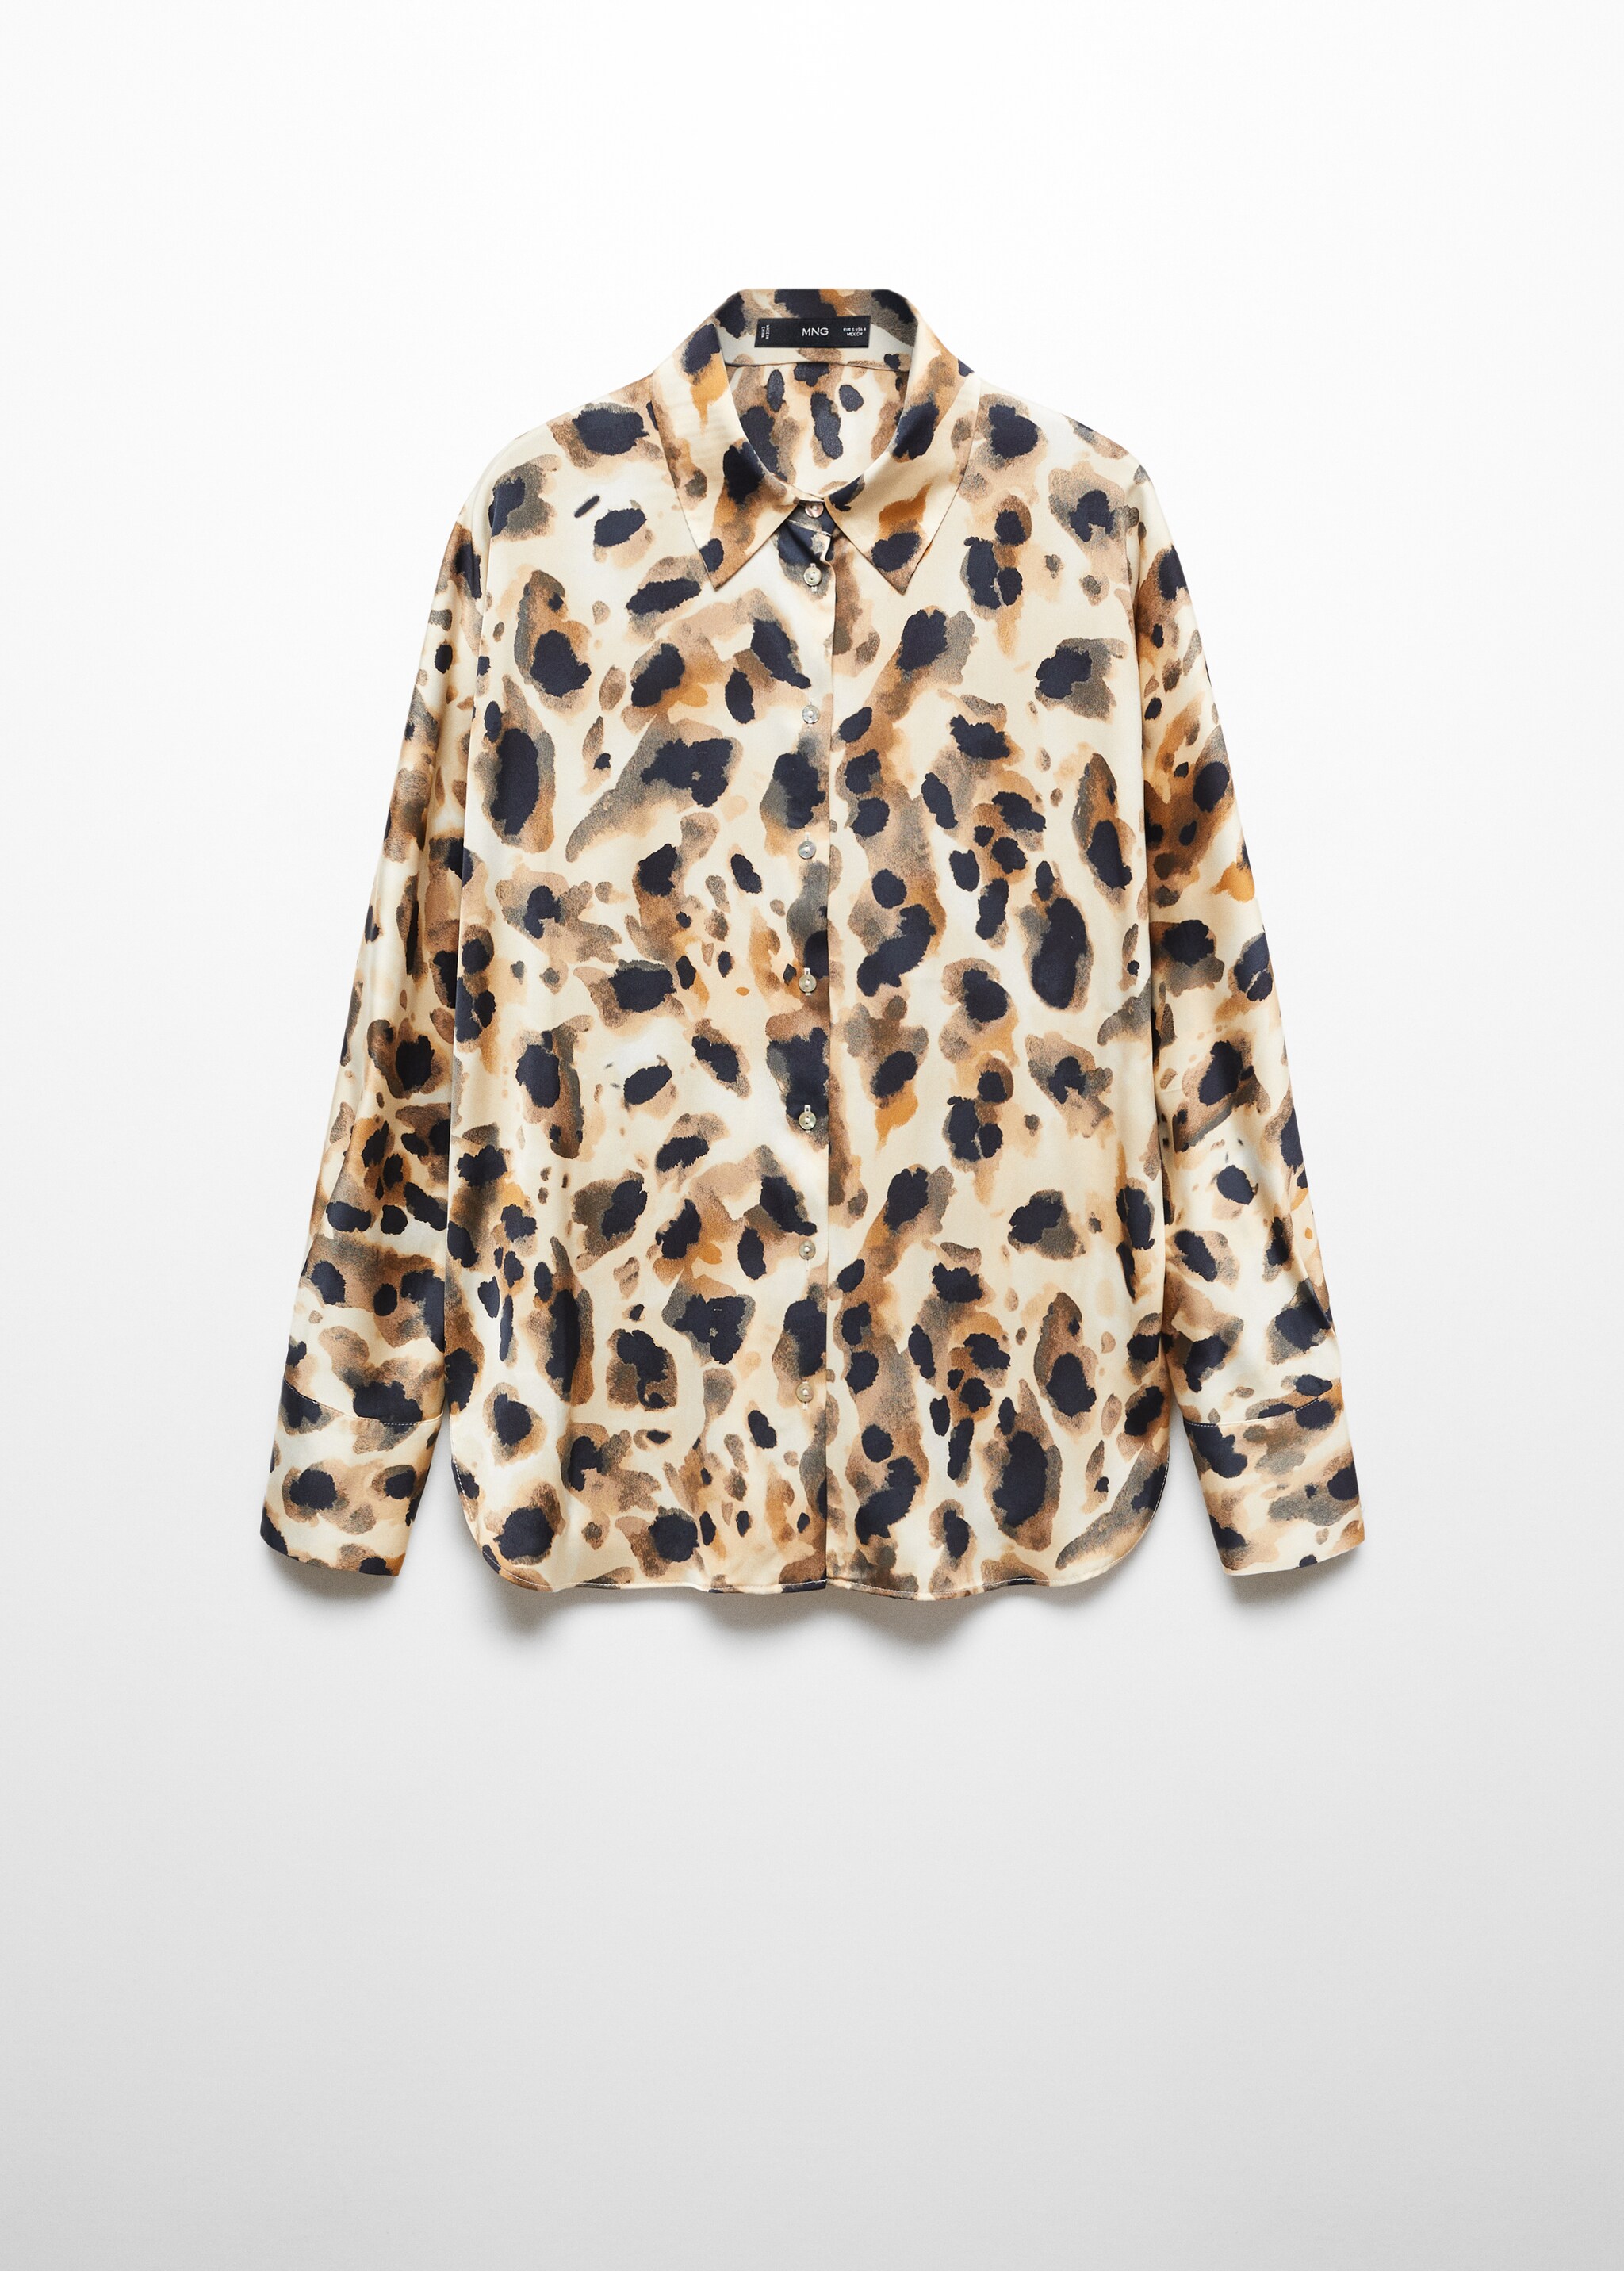 Leopard satin shirt - Article without model